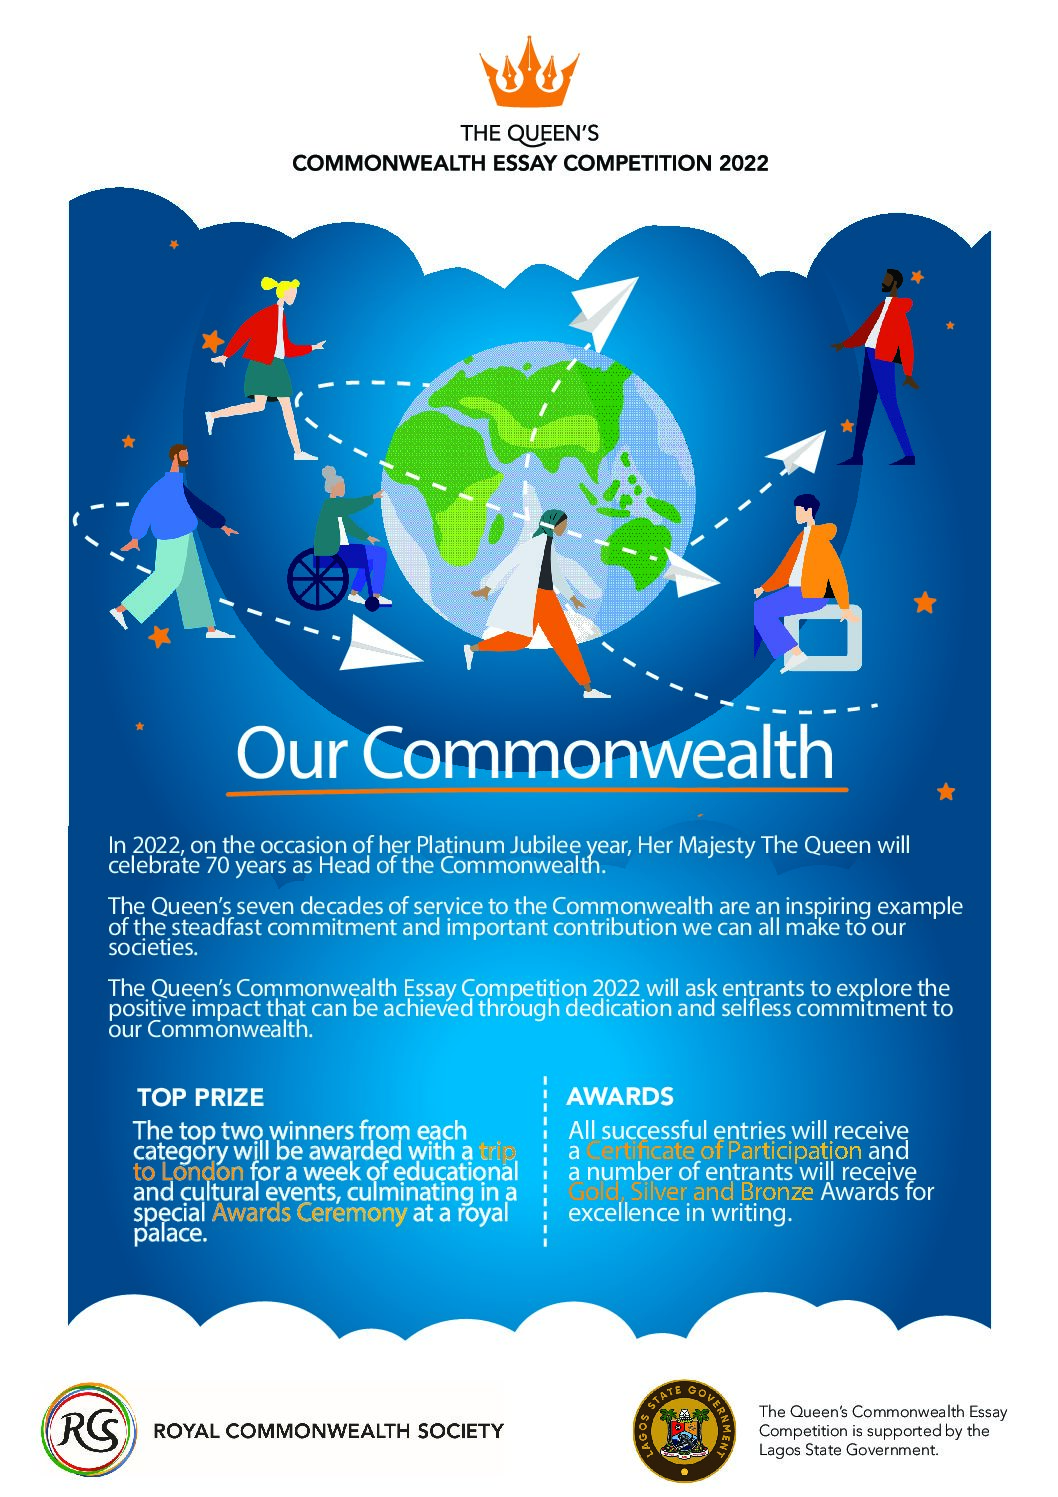 the queen's commonwealth essay competition 2022